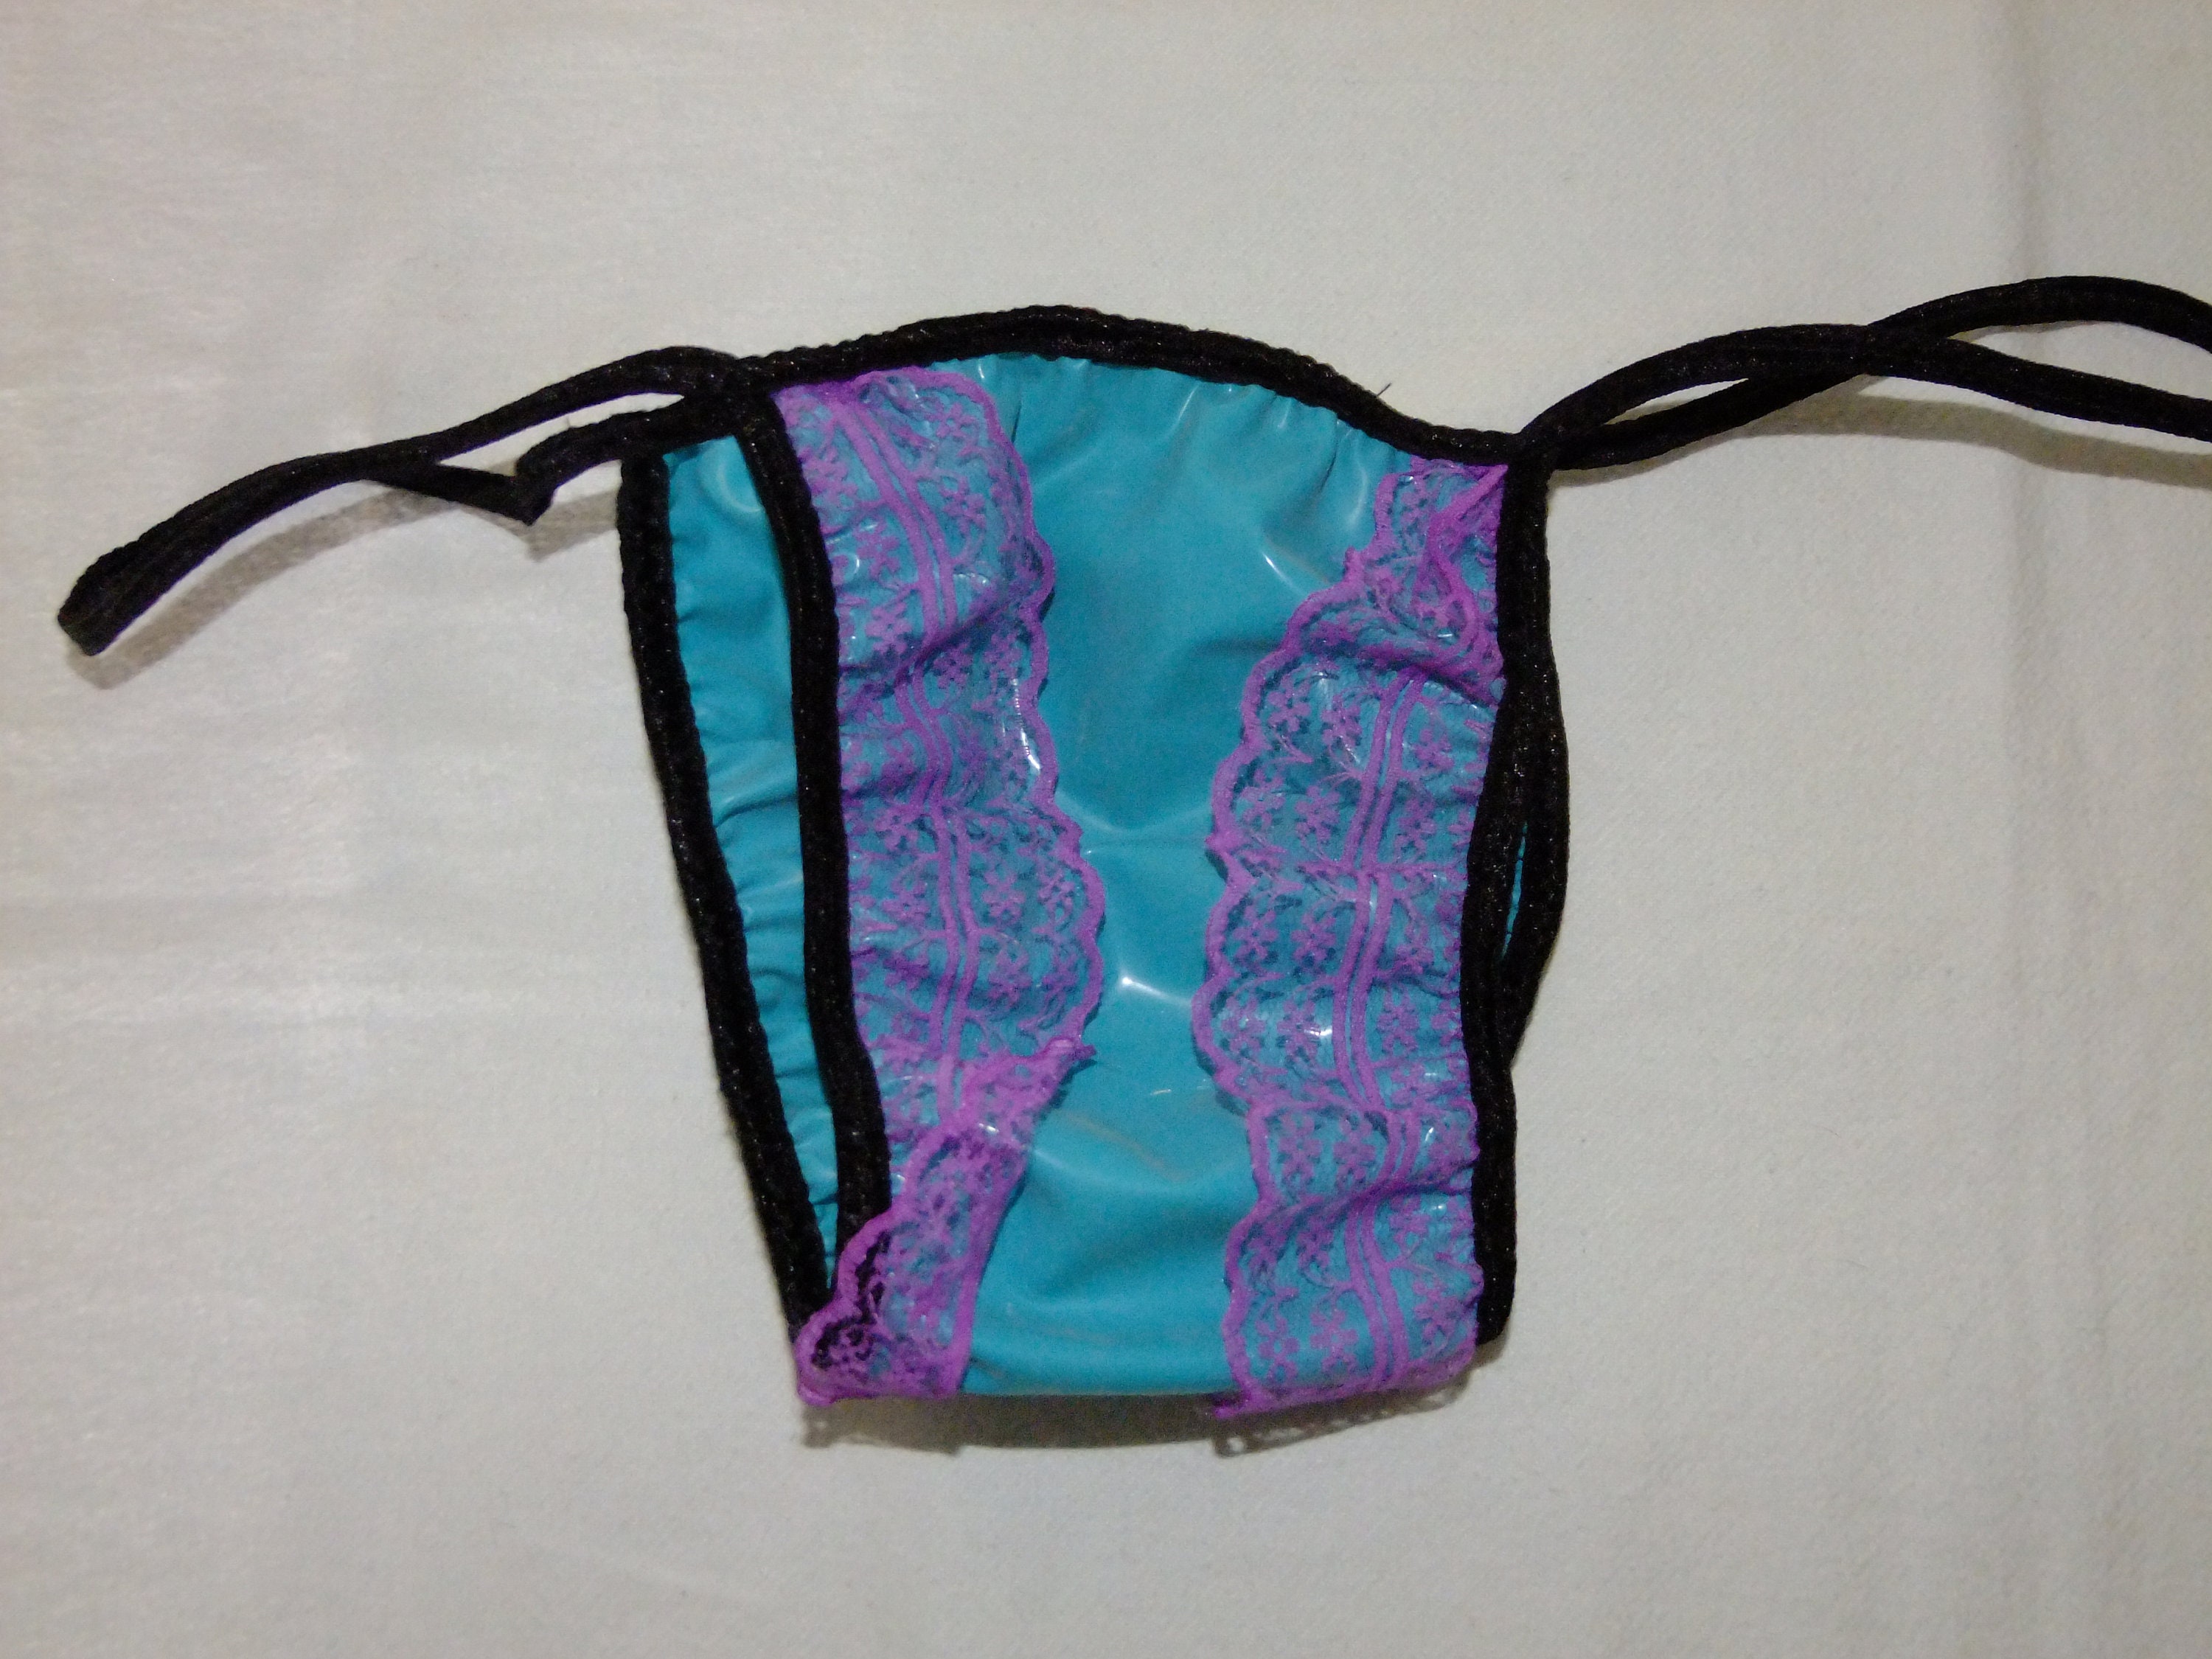 Latex Thong Wide Crotch Tanga Brief Rubber Panties Pants Panty Underwear  Sissy Roleplay Briefs Knickers Lace Frilly Frills Purple Teal -  Denmark